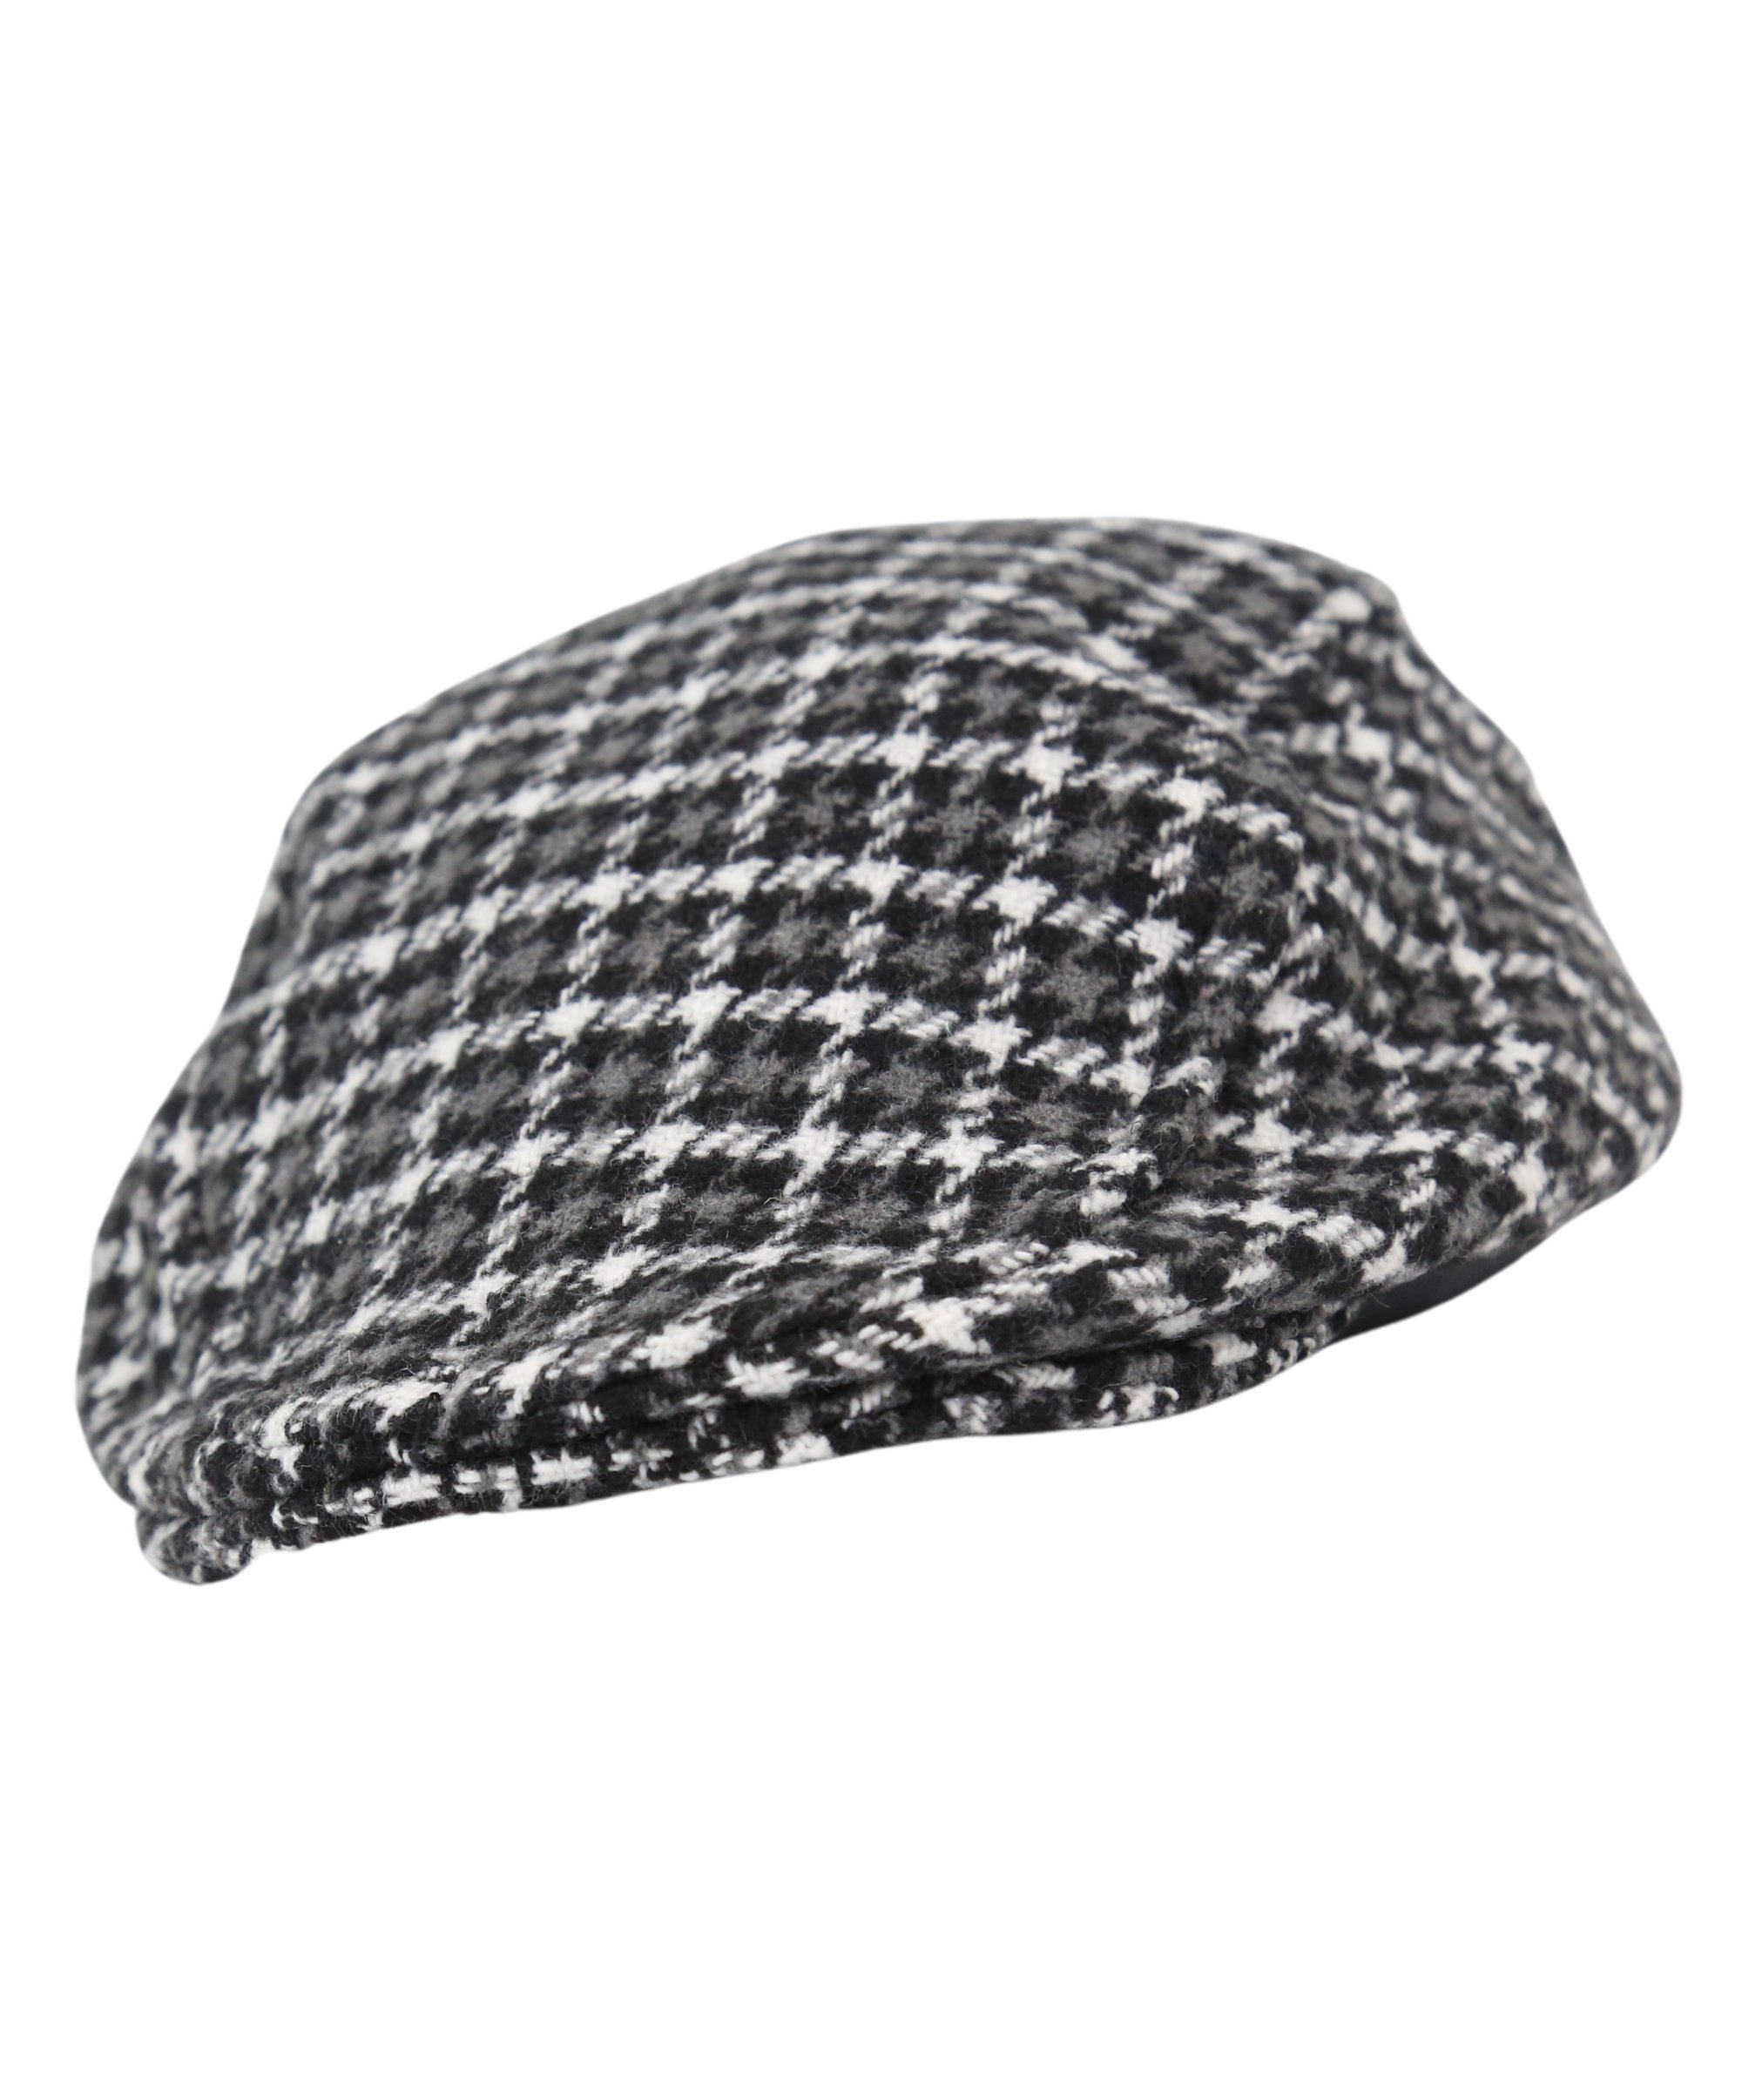 Boys Tweed Houndstooth Pea Coat with Matching Cap - Charcoal Grey